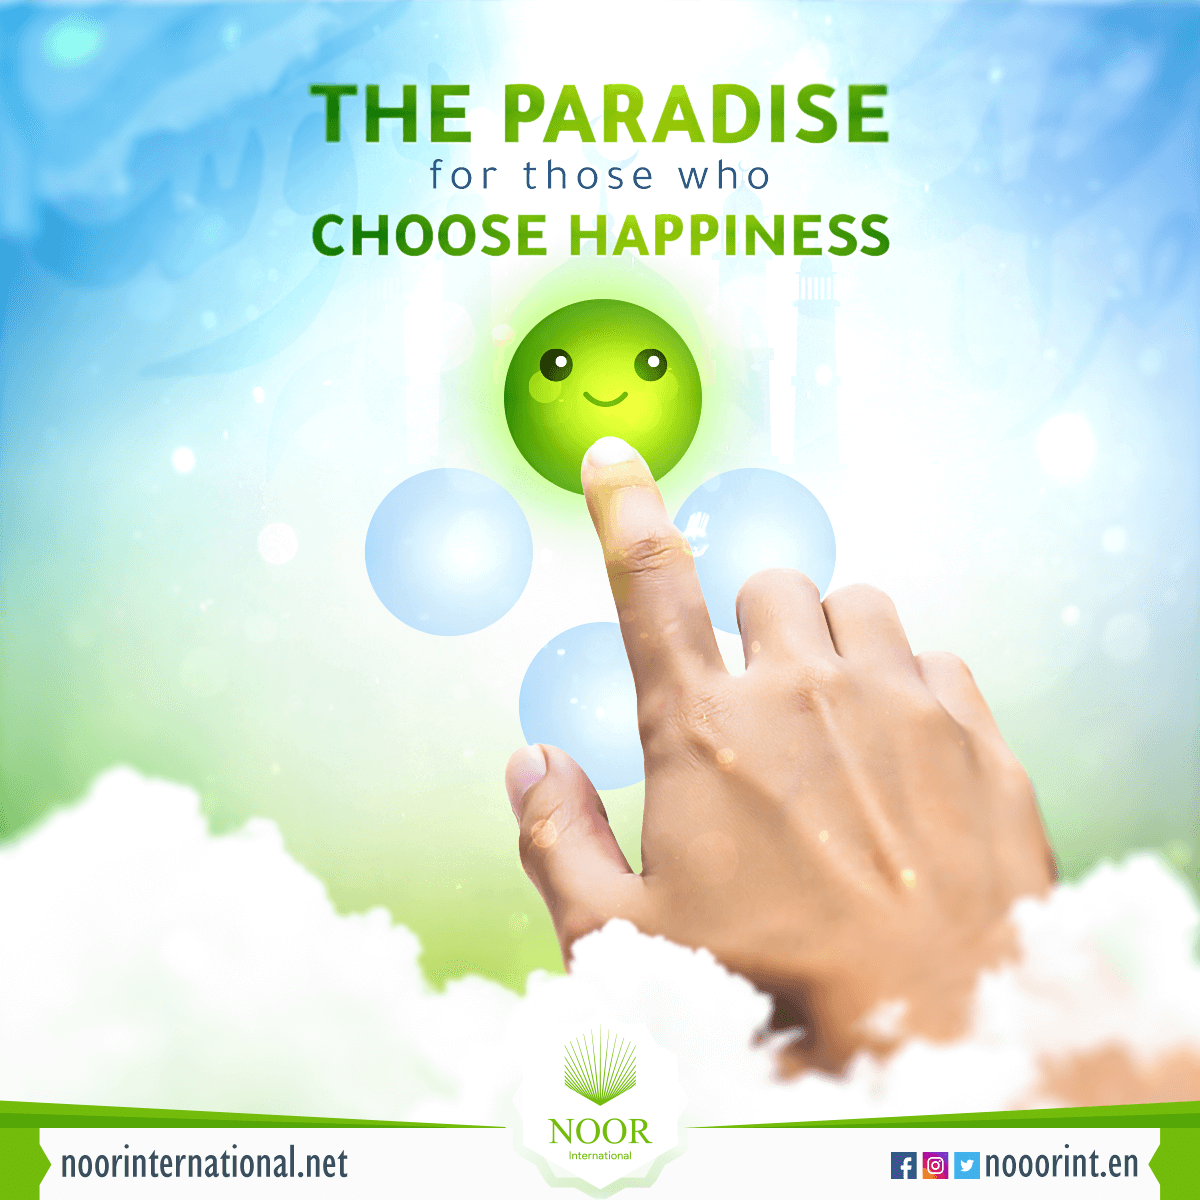 The Paradise for those who choose happiness